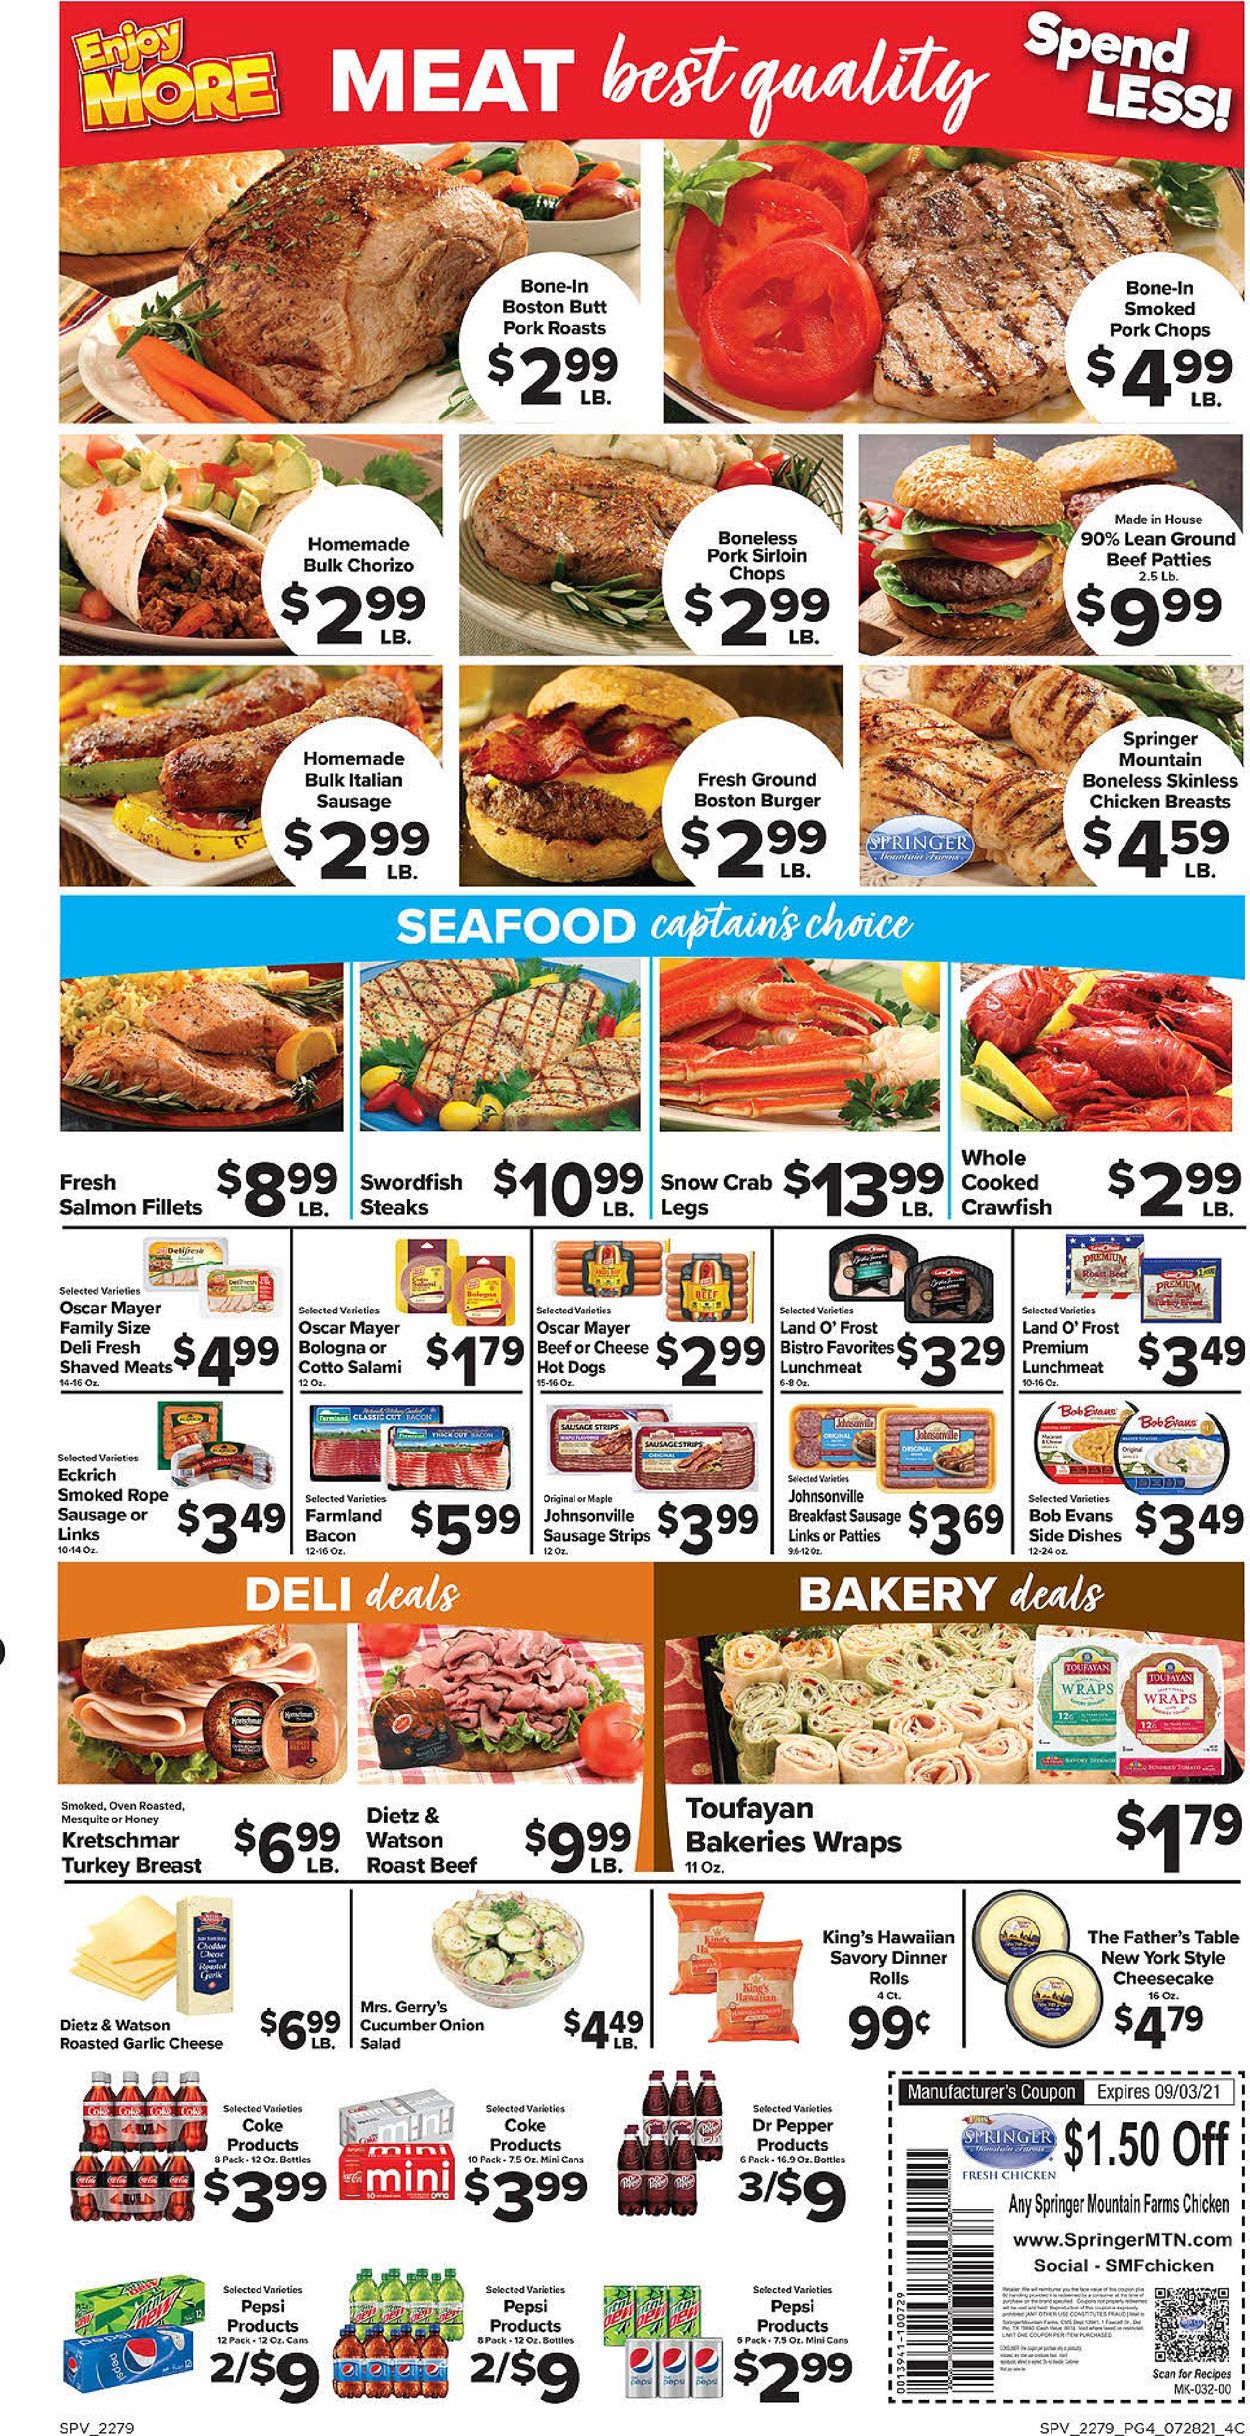 Harter House Current weekly ad 07/28 - 08/03/2021 [4] - frequent-ads.com